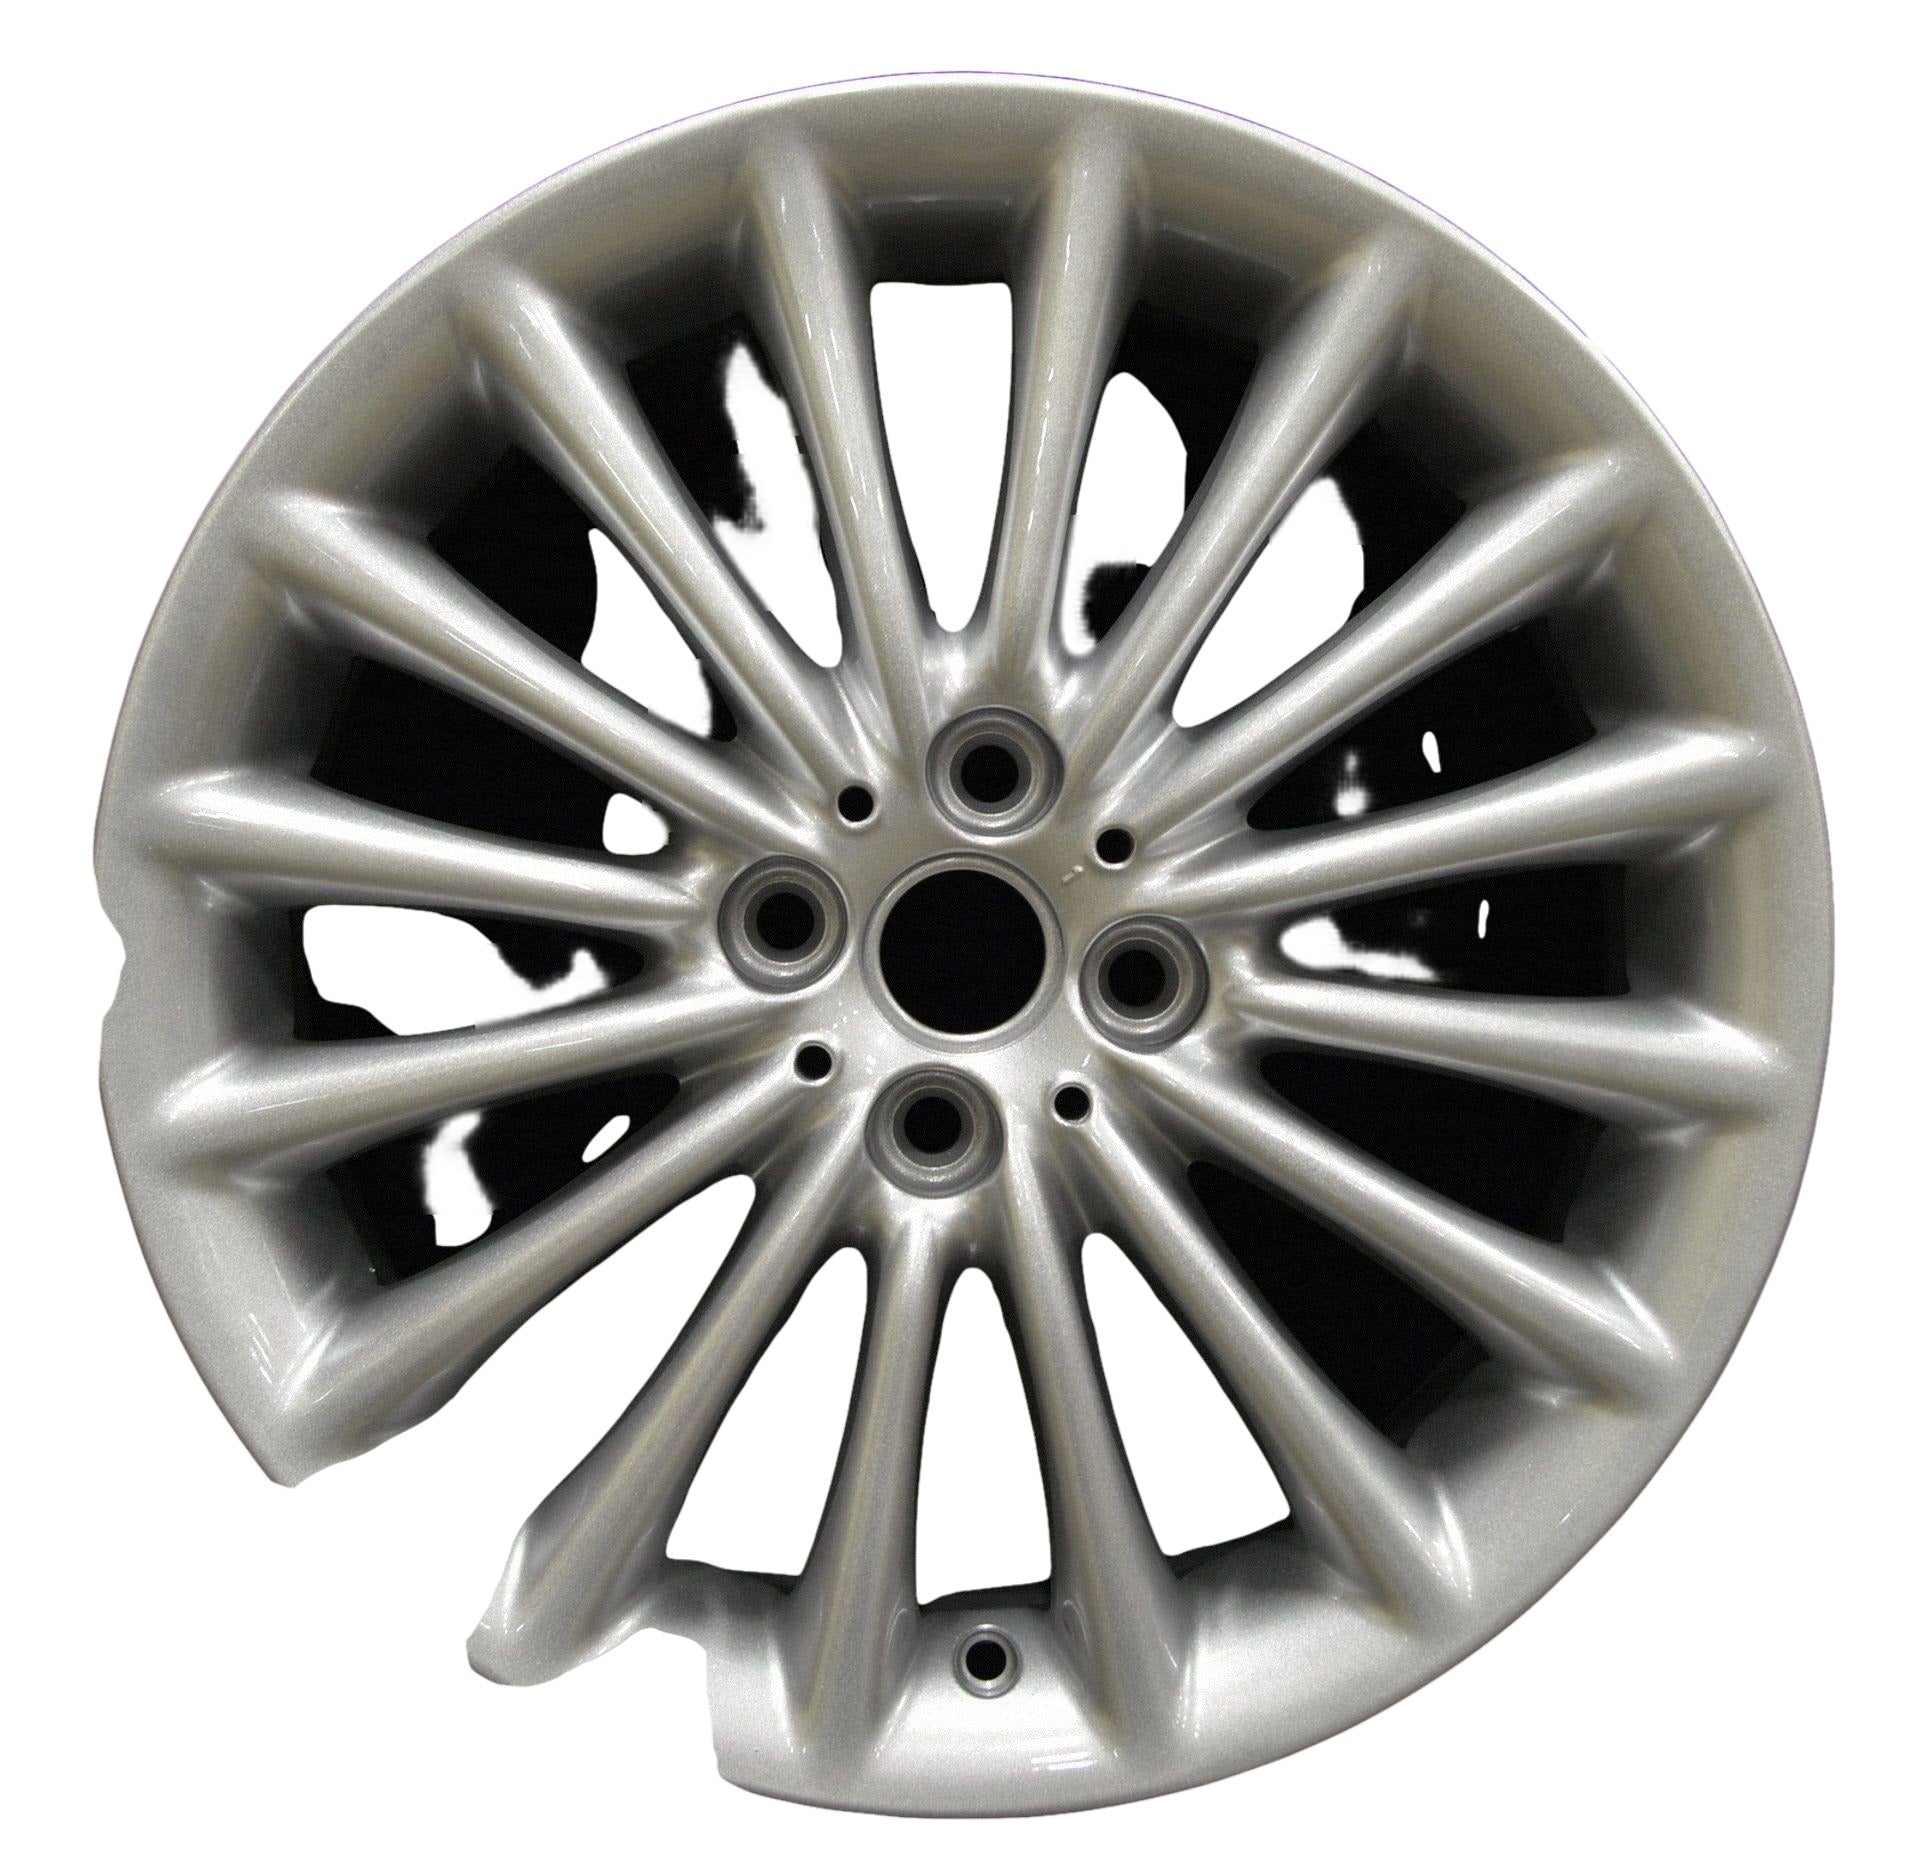 MINI Cooper Coupe  2011, 2012, 2013, 2014 Factory OEM Car Wheel Size 17x7 Alloy WAO.71184.PS02.FF